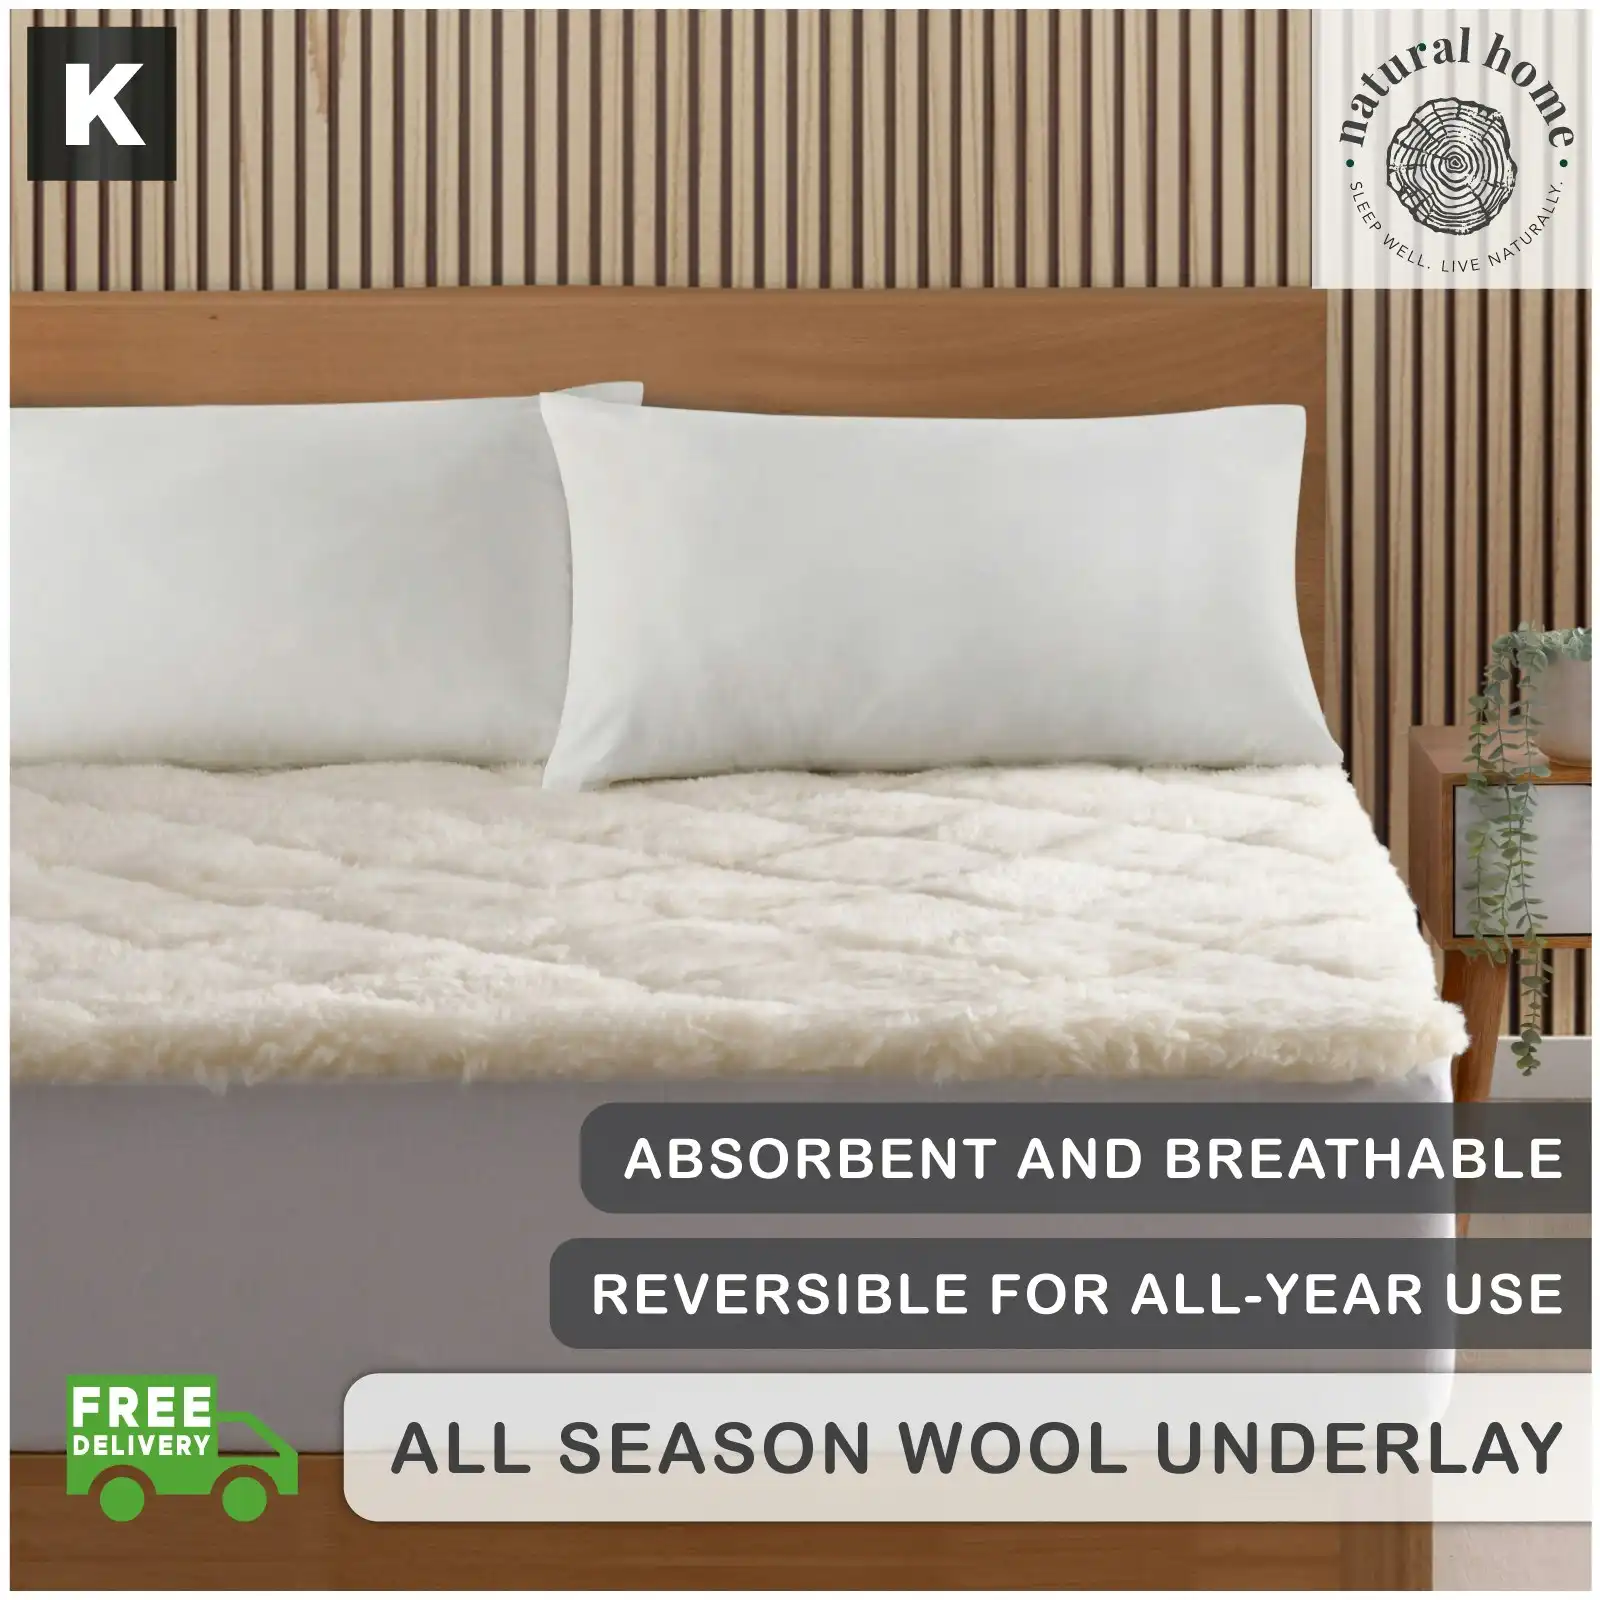 Natural Home All Season Wool Reversible Underlay - White - King Bed